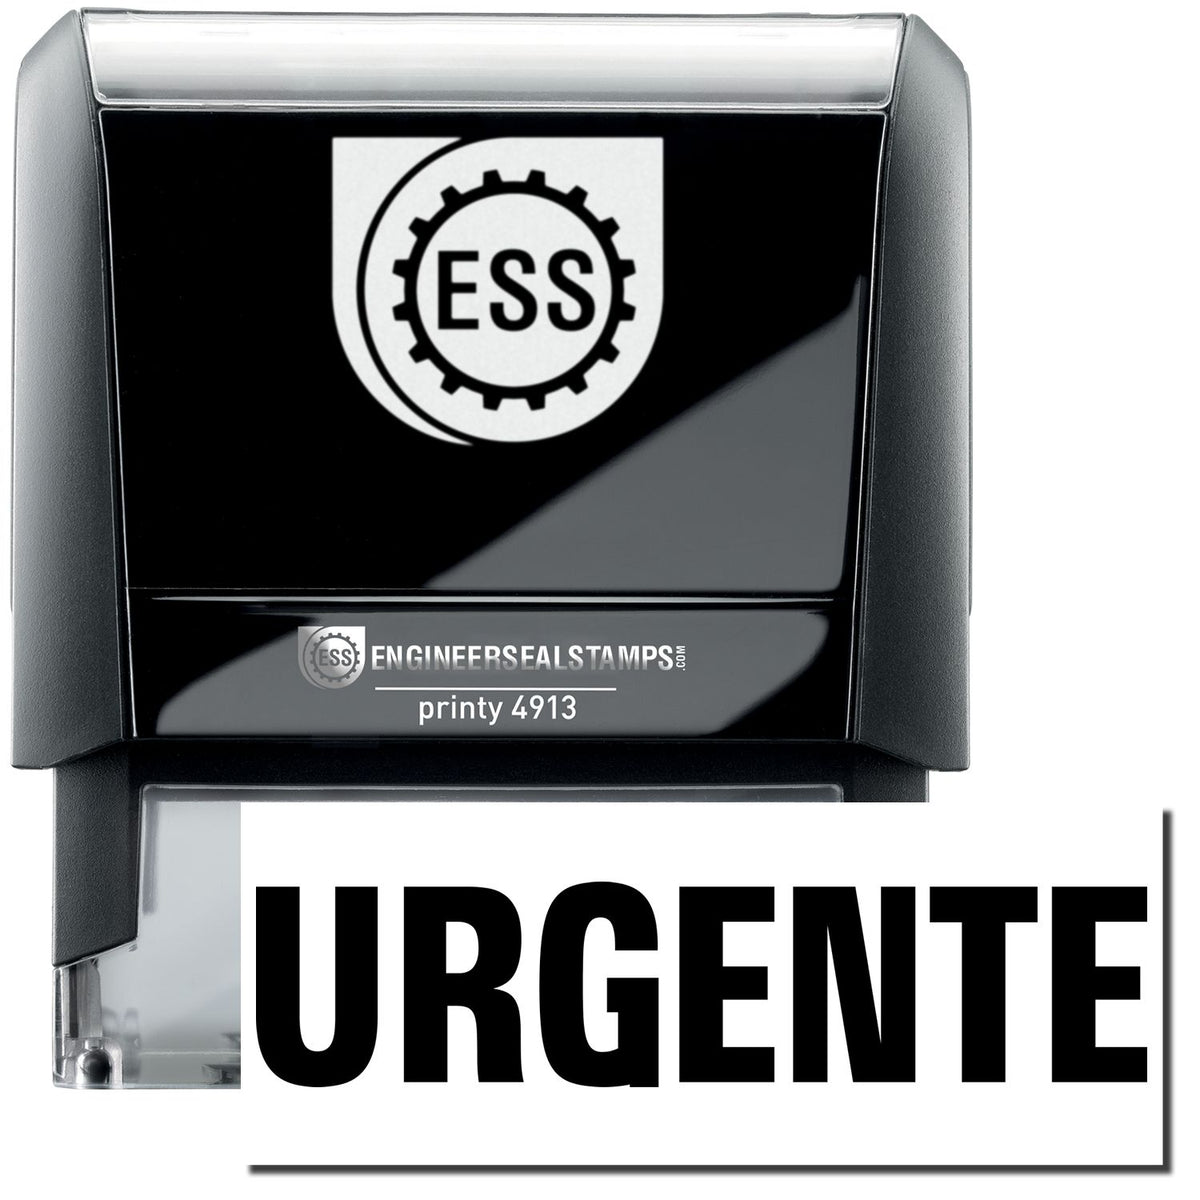 A self-inking stamp with a stamped image showing how the text &quot;URGENTE&quot; in a large font is displayed by it after stamping.